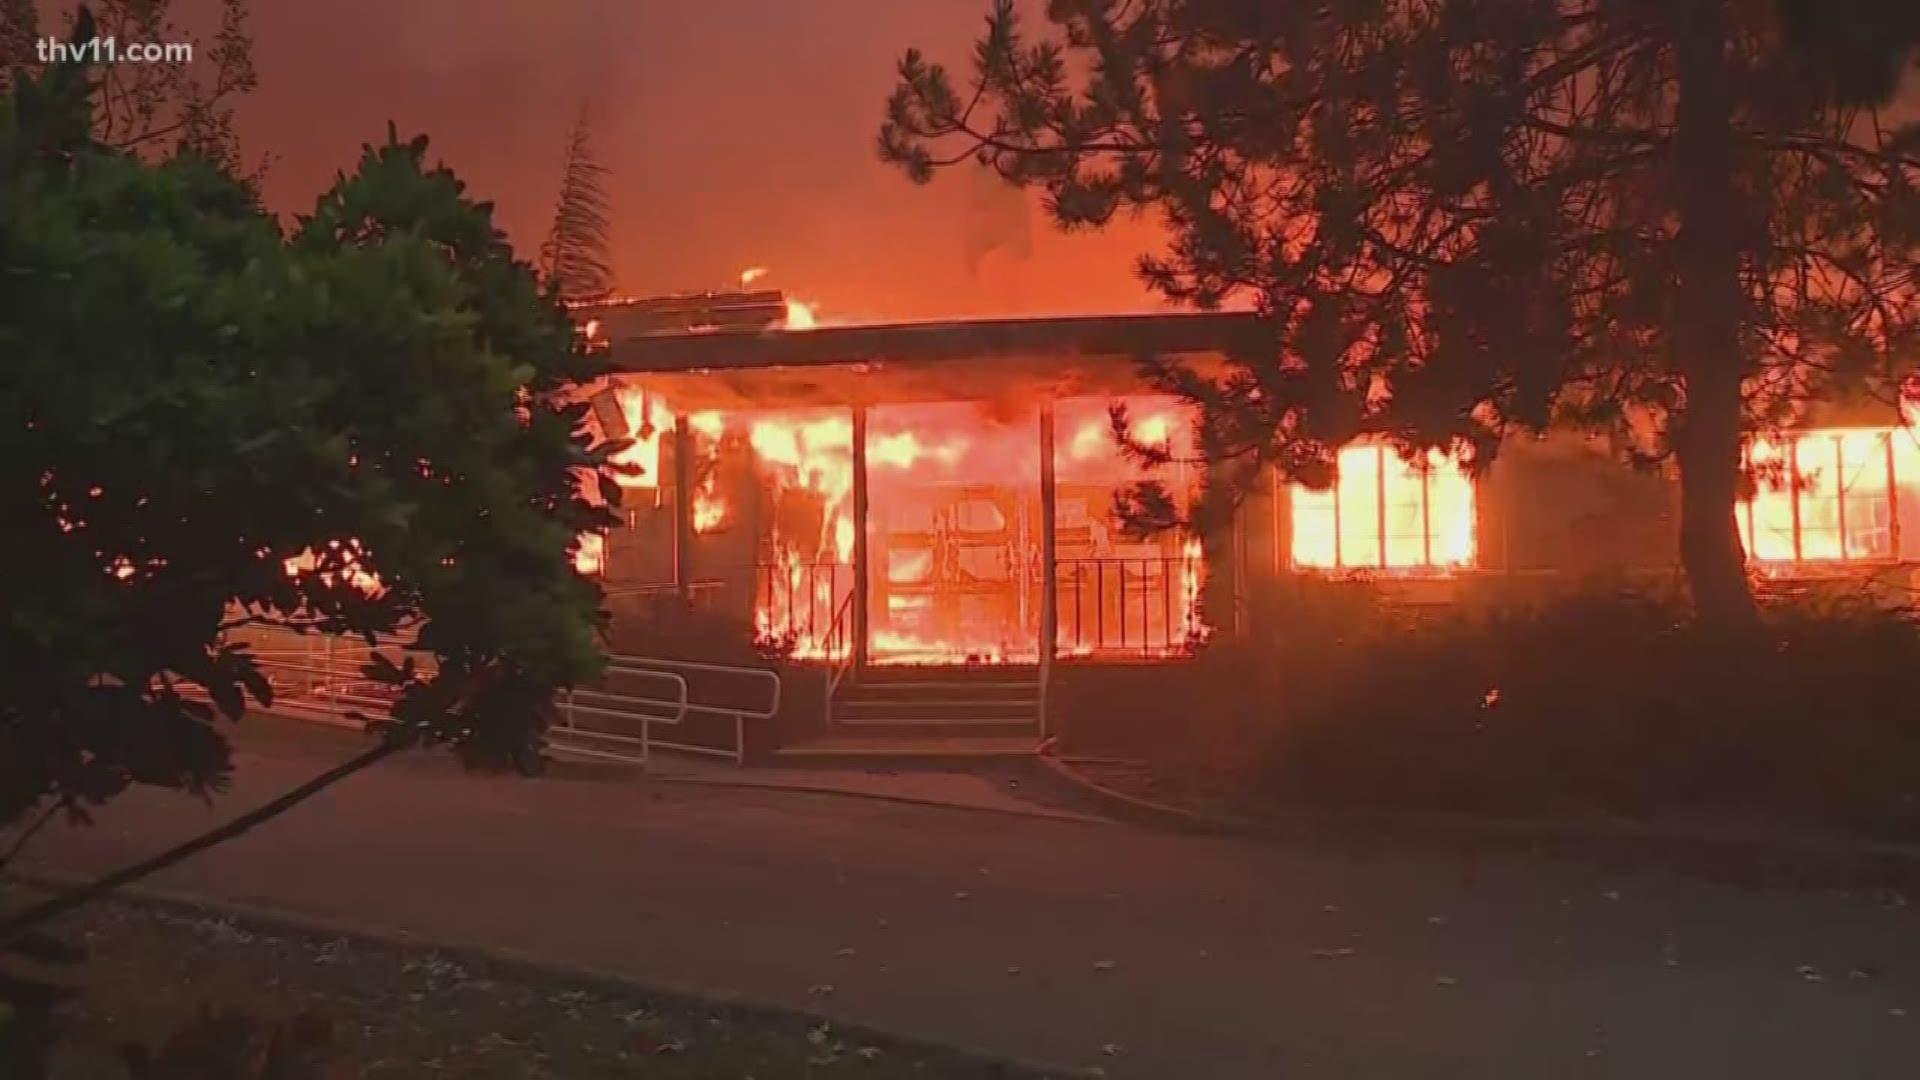 In Northern California, the Camp Fire has already destroyed more than 6-thousand buildings... making it the most destructive and deadliest wildfire in the state's history.